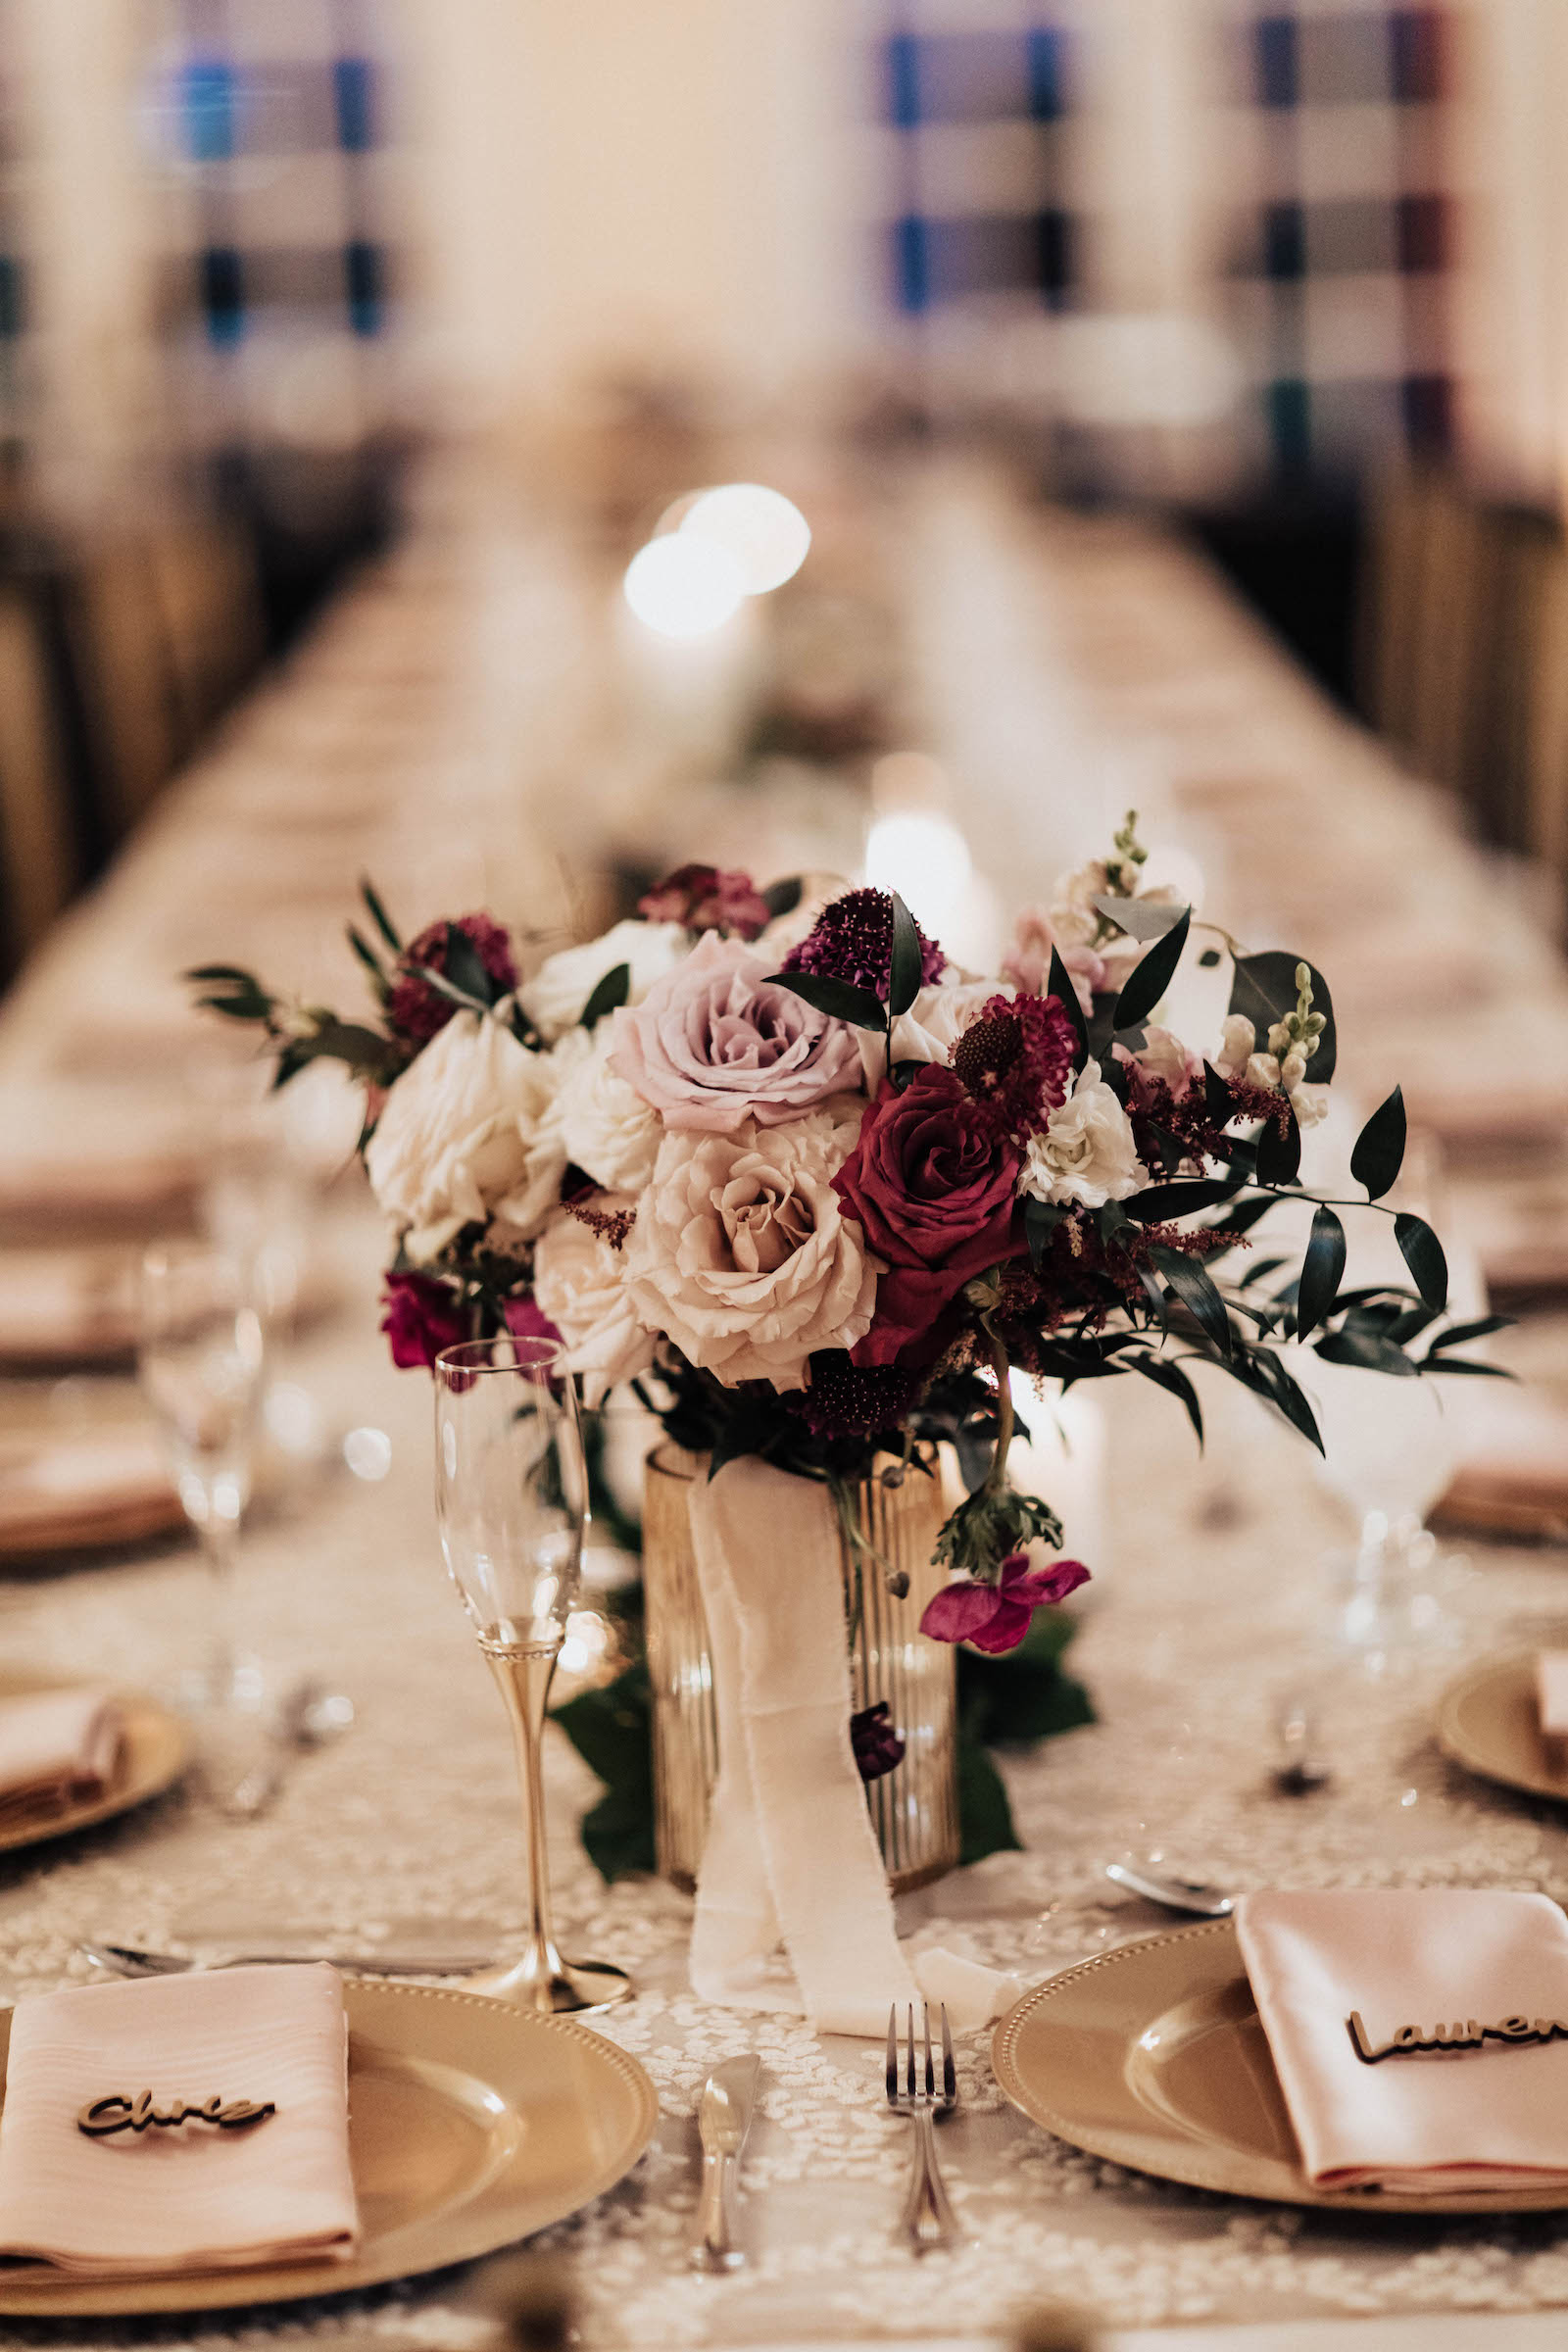 Warm Romantic Neutral Wedding Reception Decor, Blush Pink, White and Berry Colored Roses with Greenery Small Floral Centerpiece | Tampa Bay Wedding Planner Coastal Coordinating